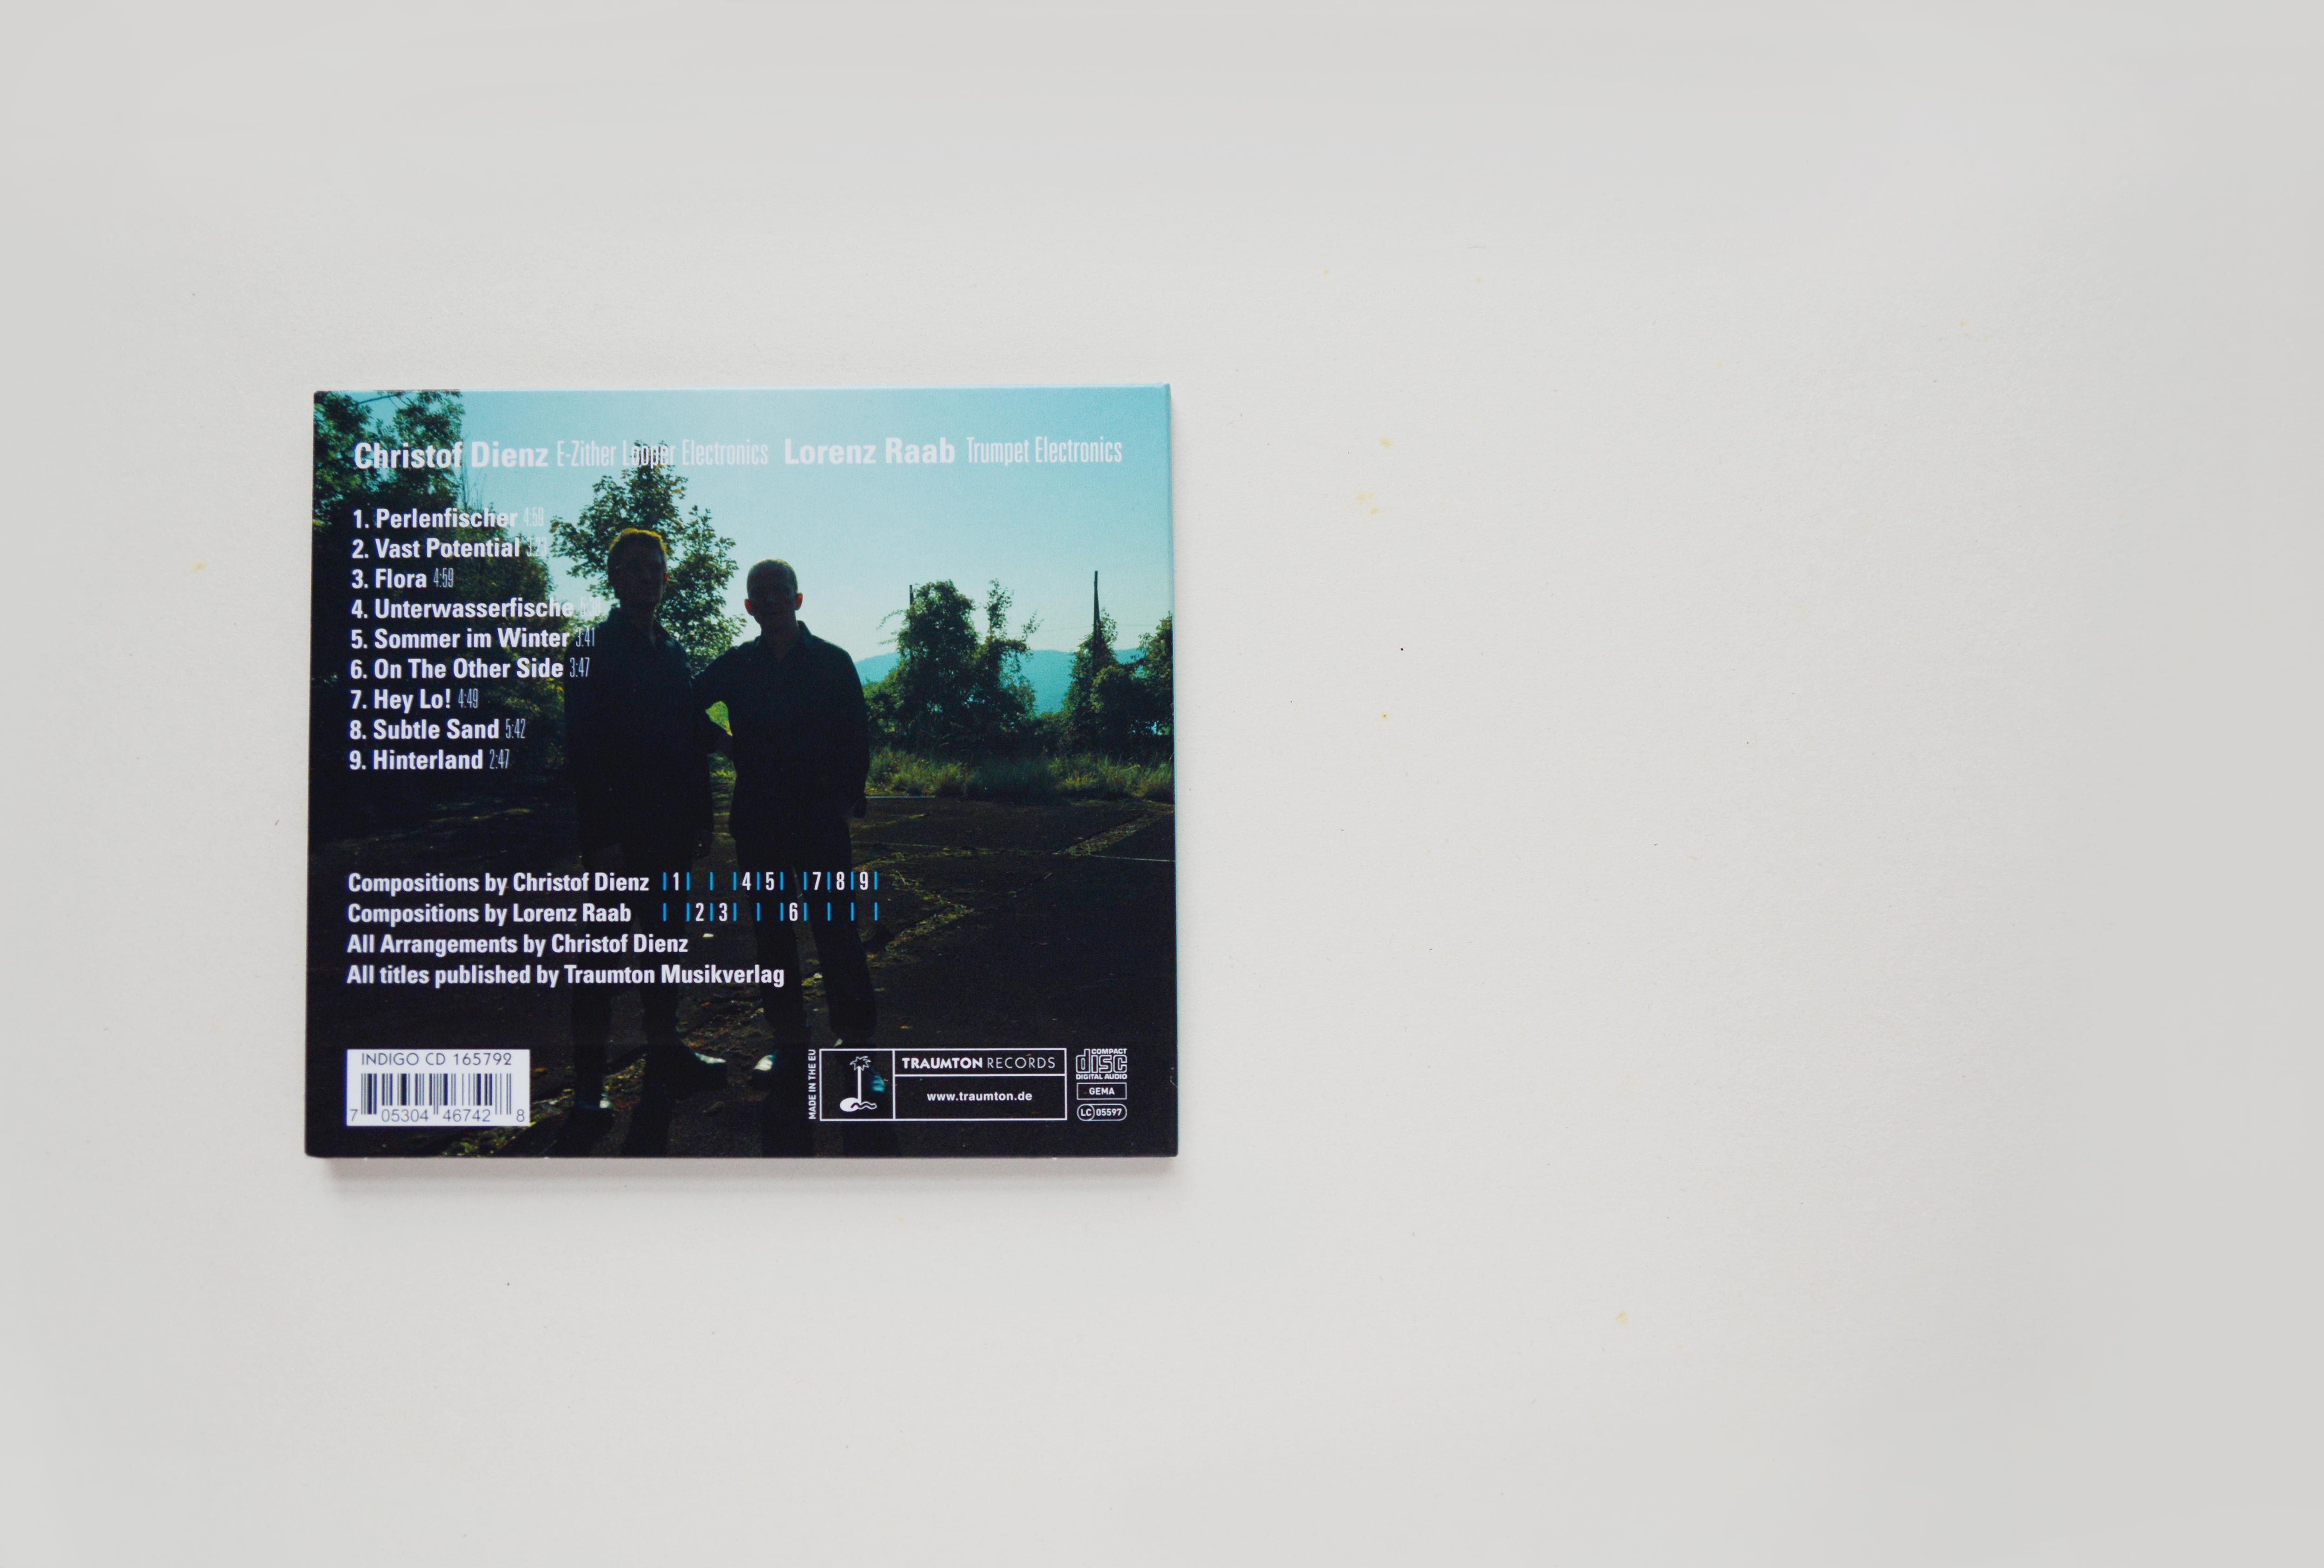 Back CD. Full-page photo. Different shot of 2 man standing on the tennis court. Songtitles and credits overlayed.